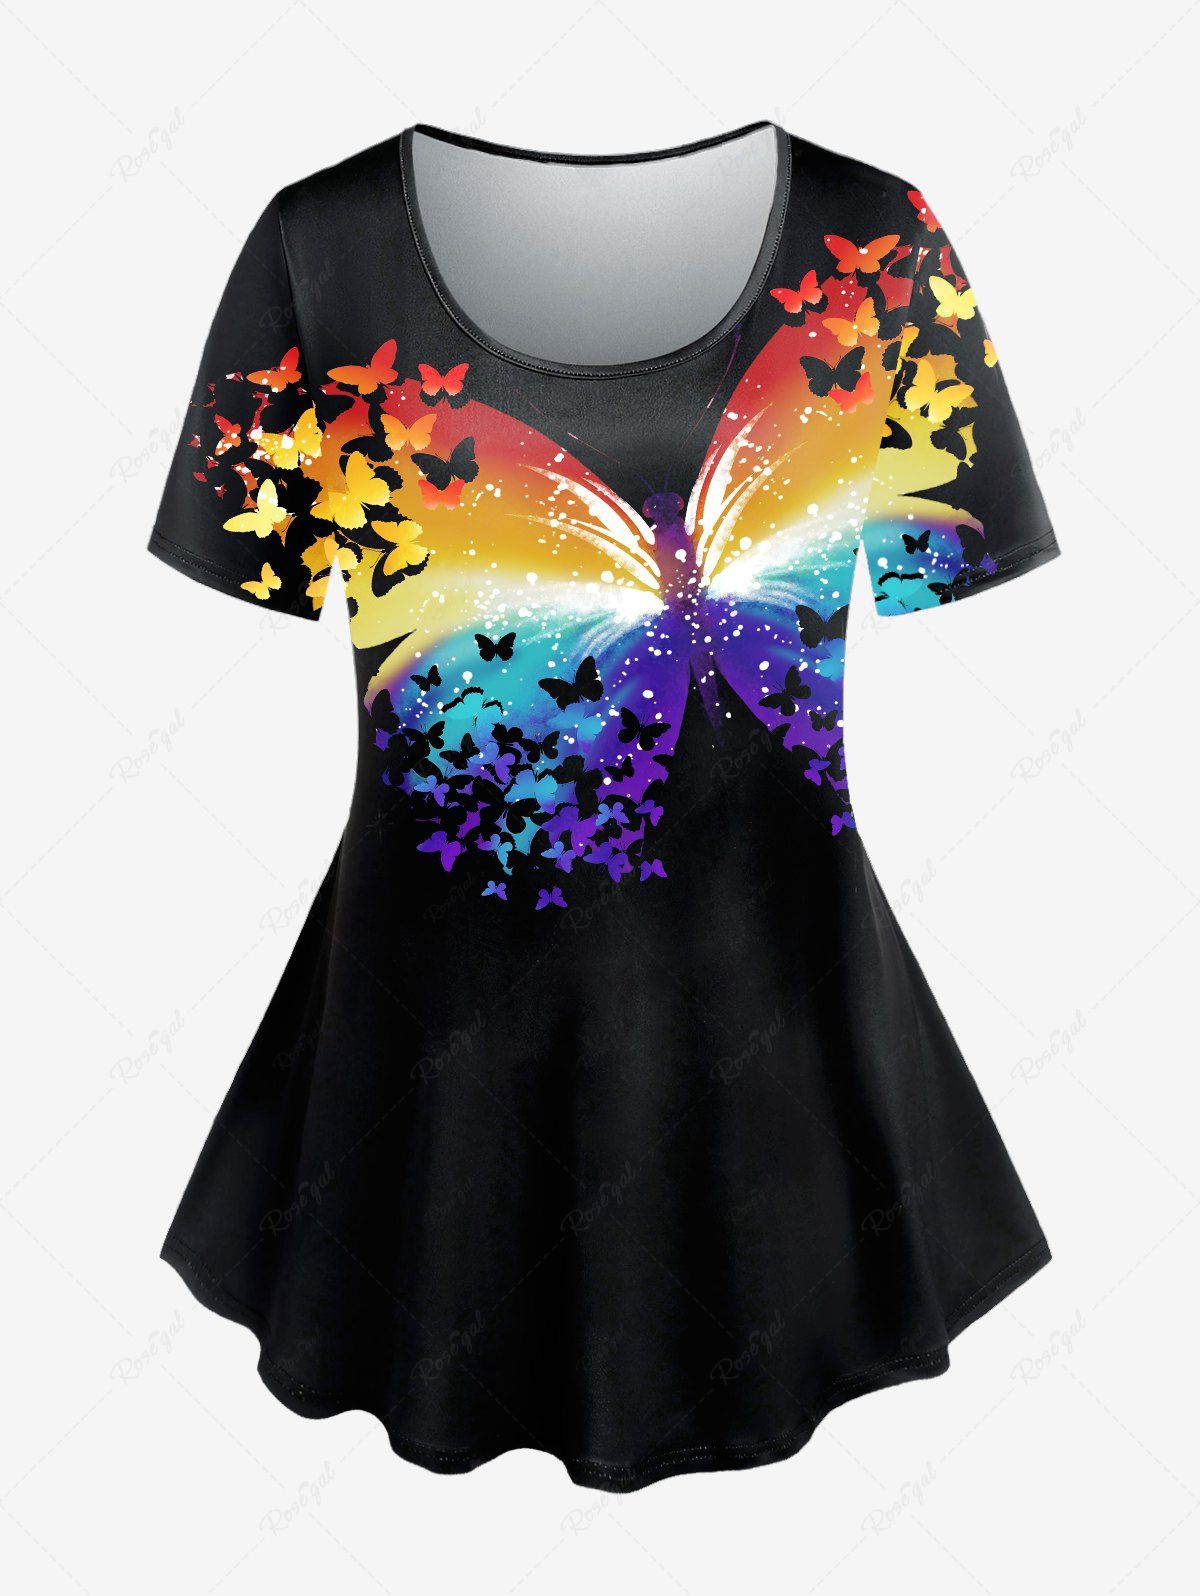 Chic Plus Size Short Sleeve Rainbow Butterfly Print T-shirt  